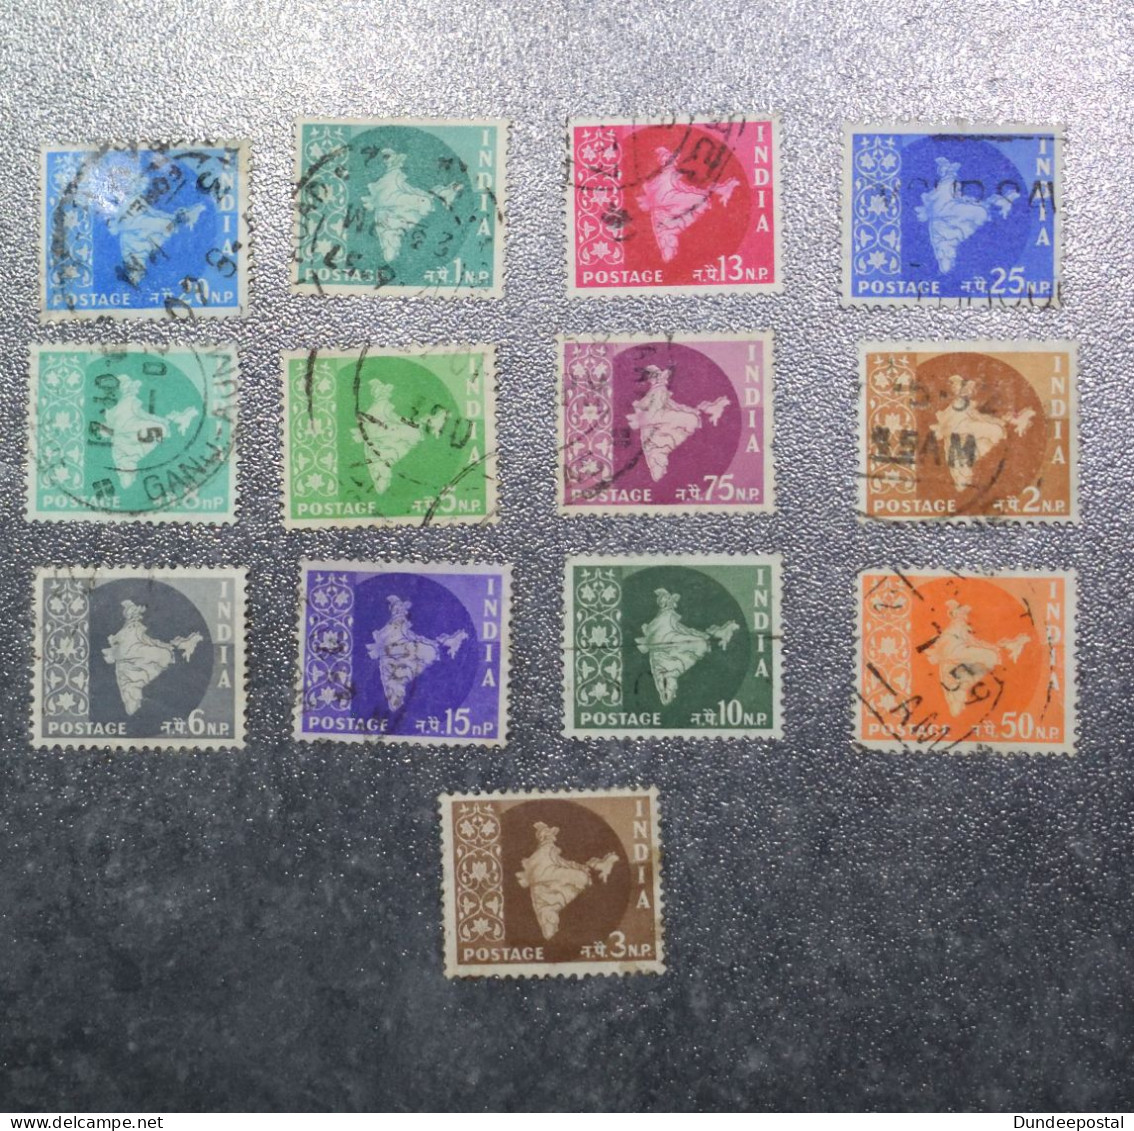 INDIA  STAMPS  Coms 1957     (N20)   ~~L@@K~~ - Used Stamps